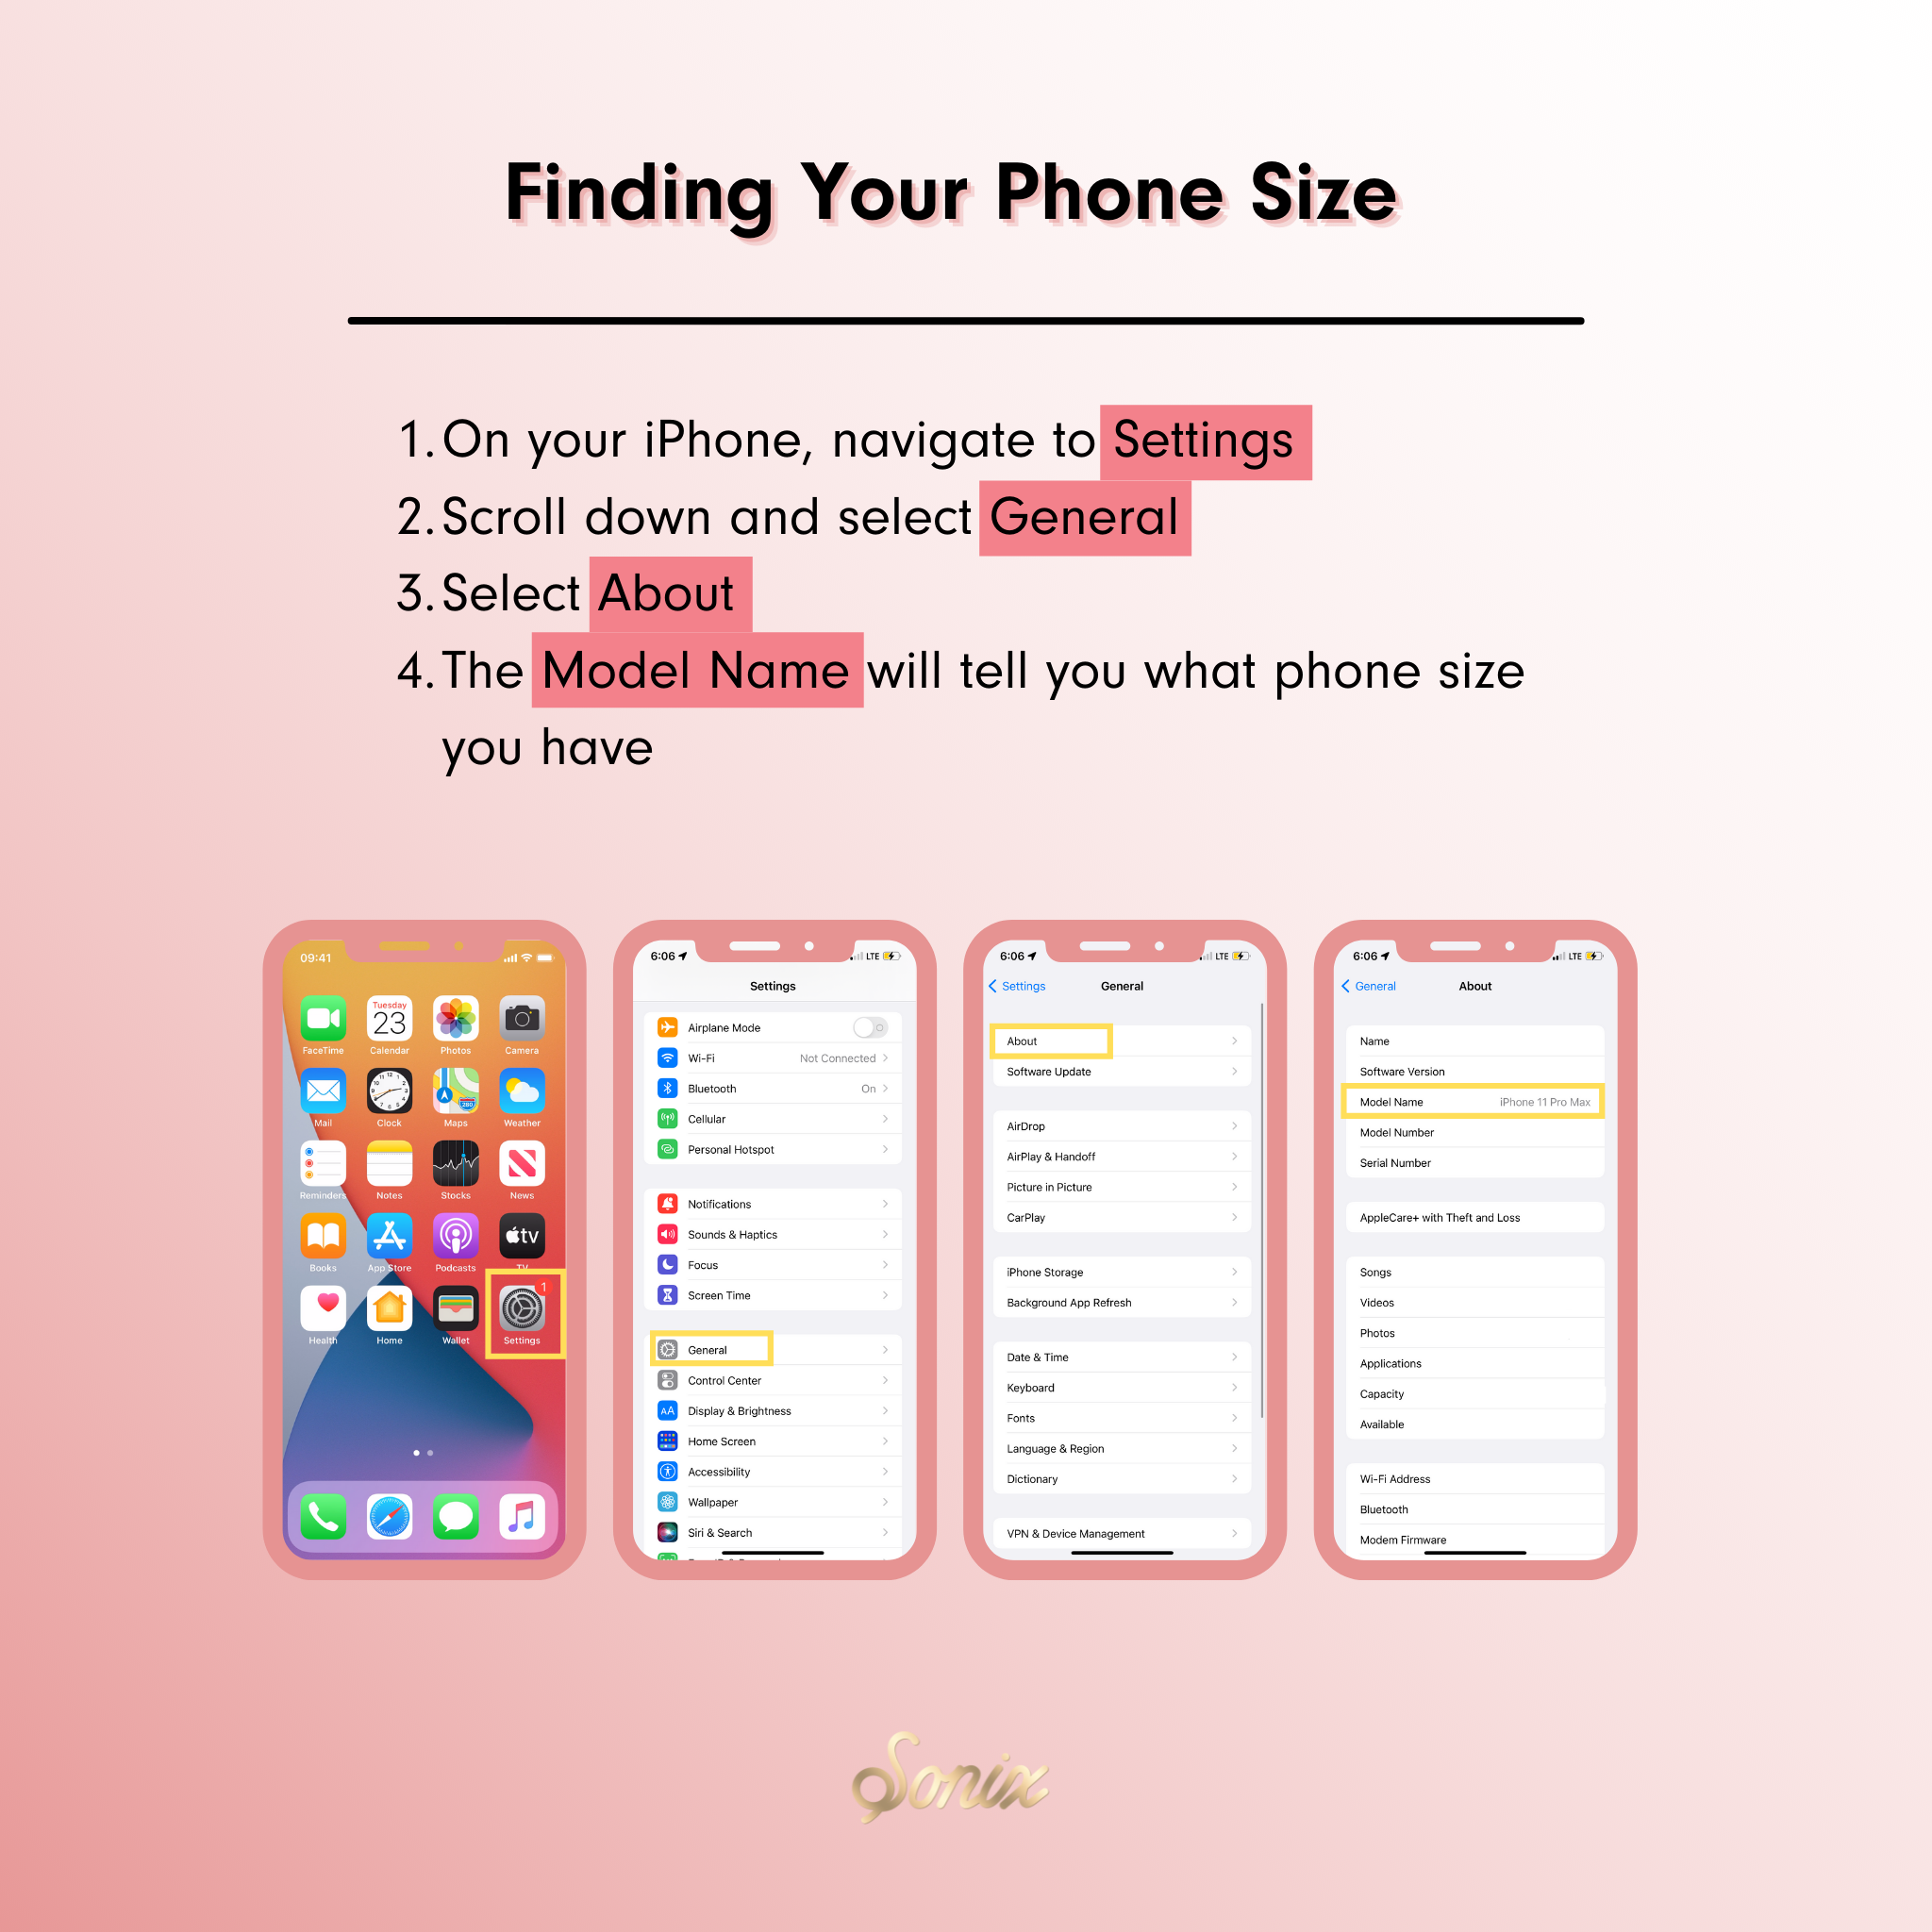 info graphic on finding your phone size